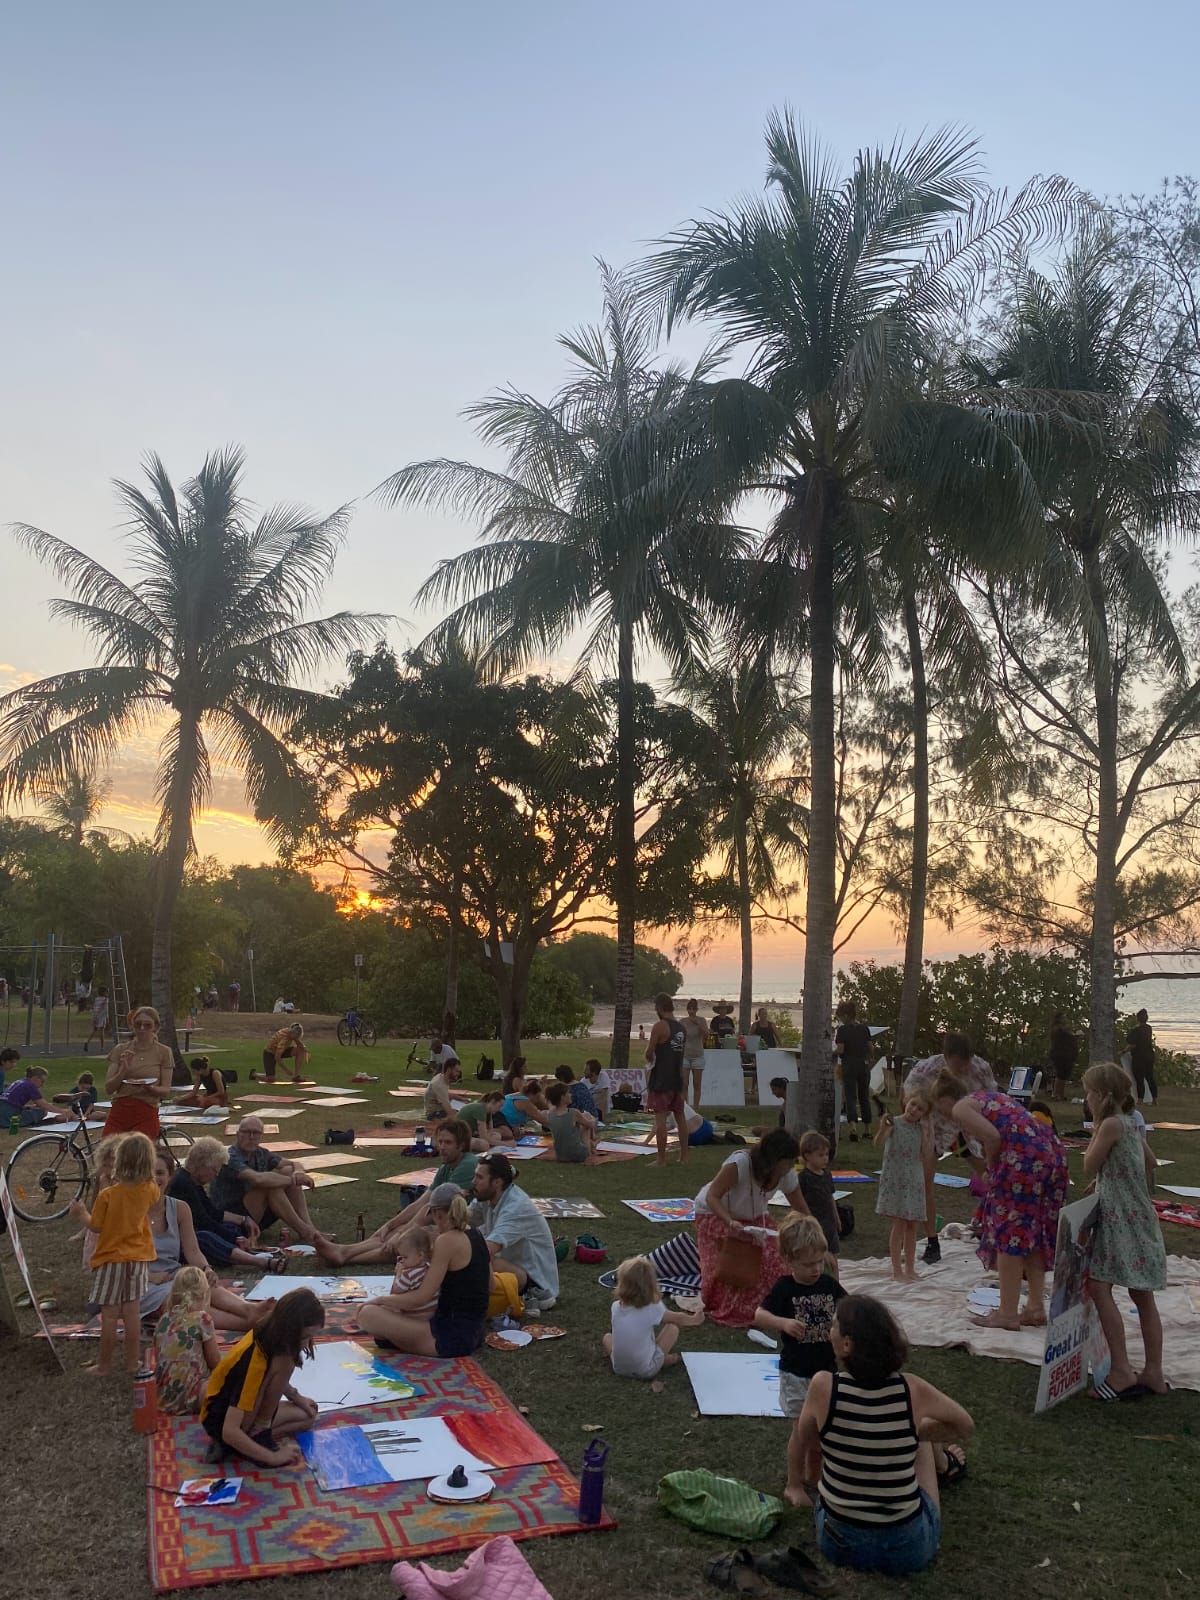 Paint, Pizza & Picnic #2 at the Nightcliff Foreshore